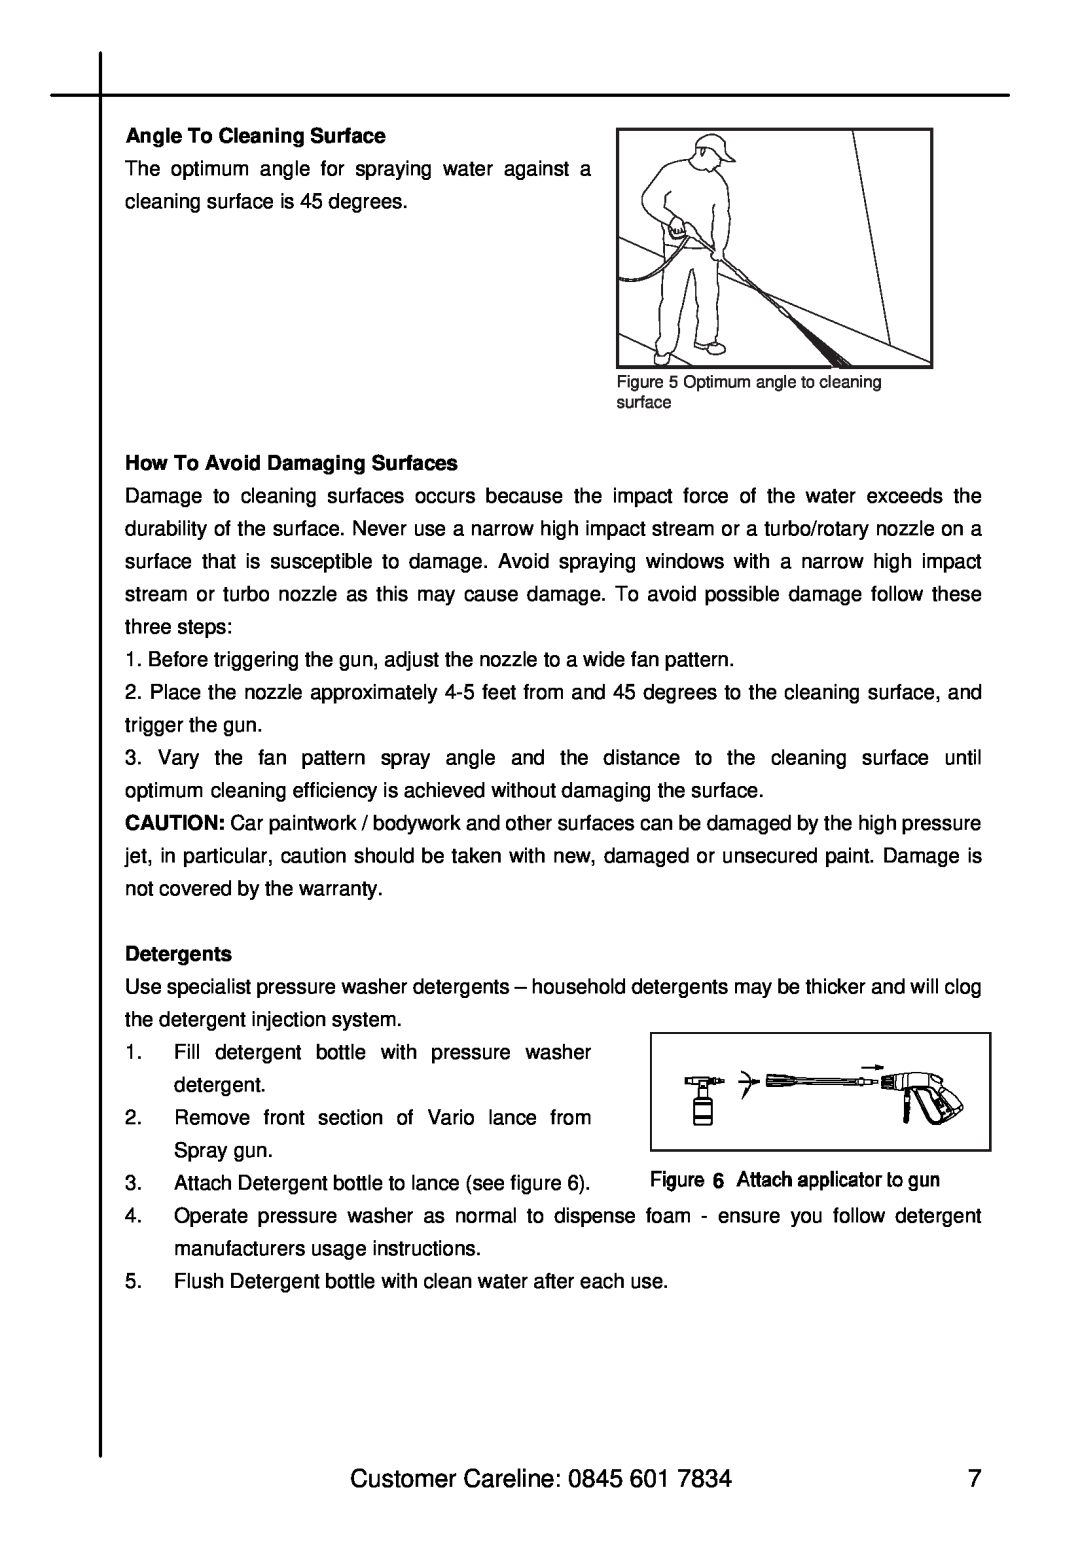 Halfords HP 1400 manual Angle To Cleaning Surface, How To Avoid Damaging Surfaces, Detergents 